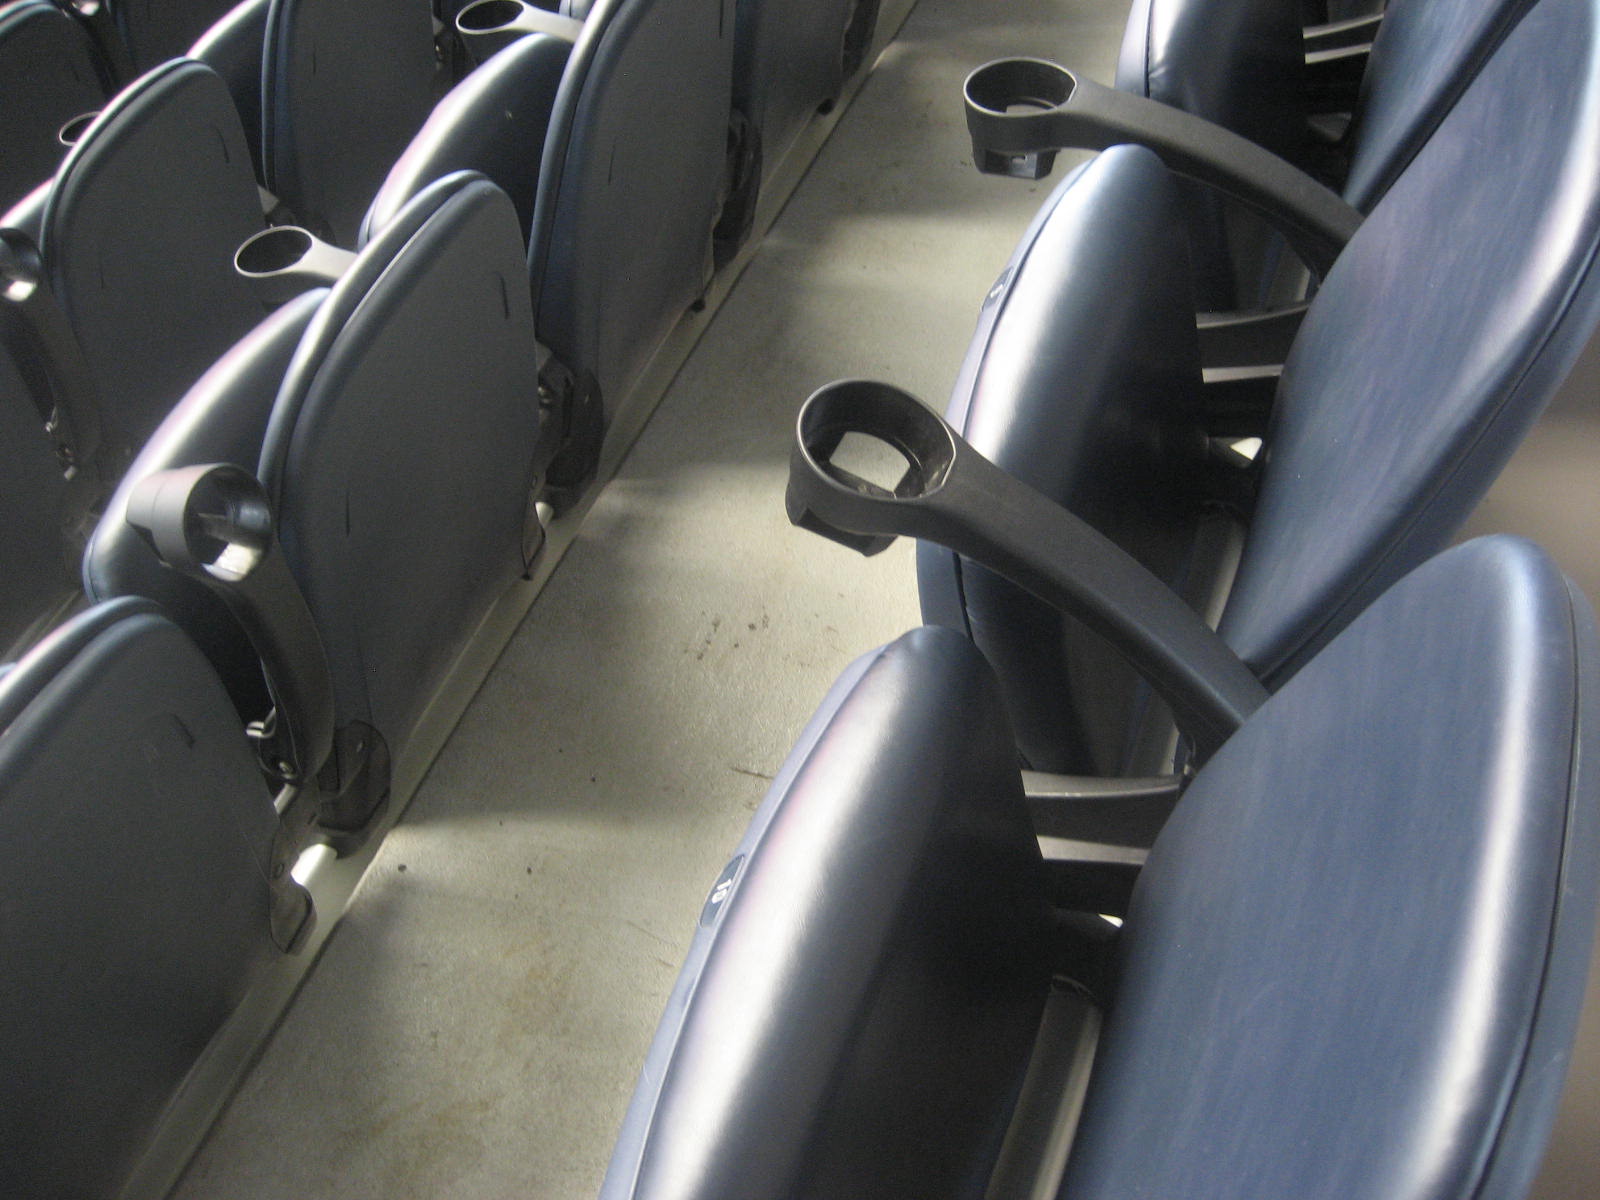 Padded seats with cupholders